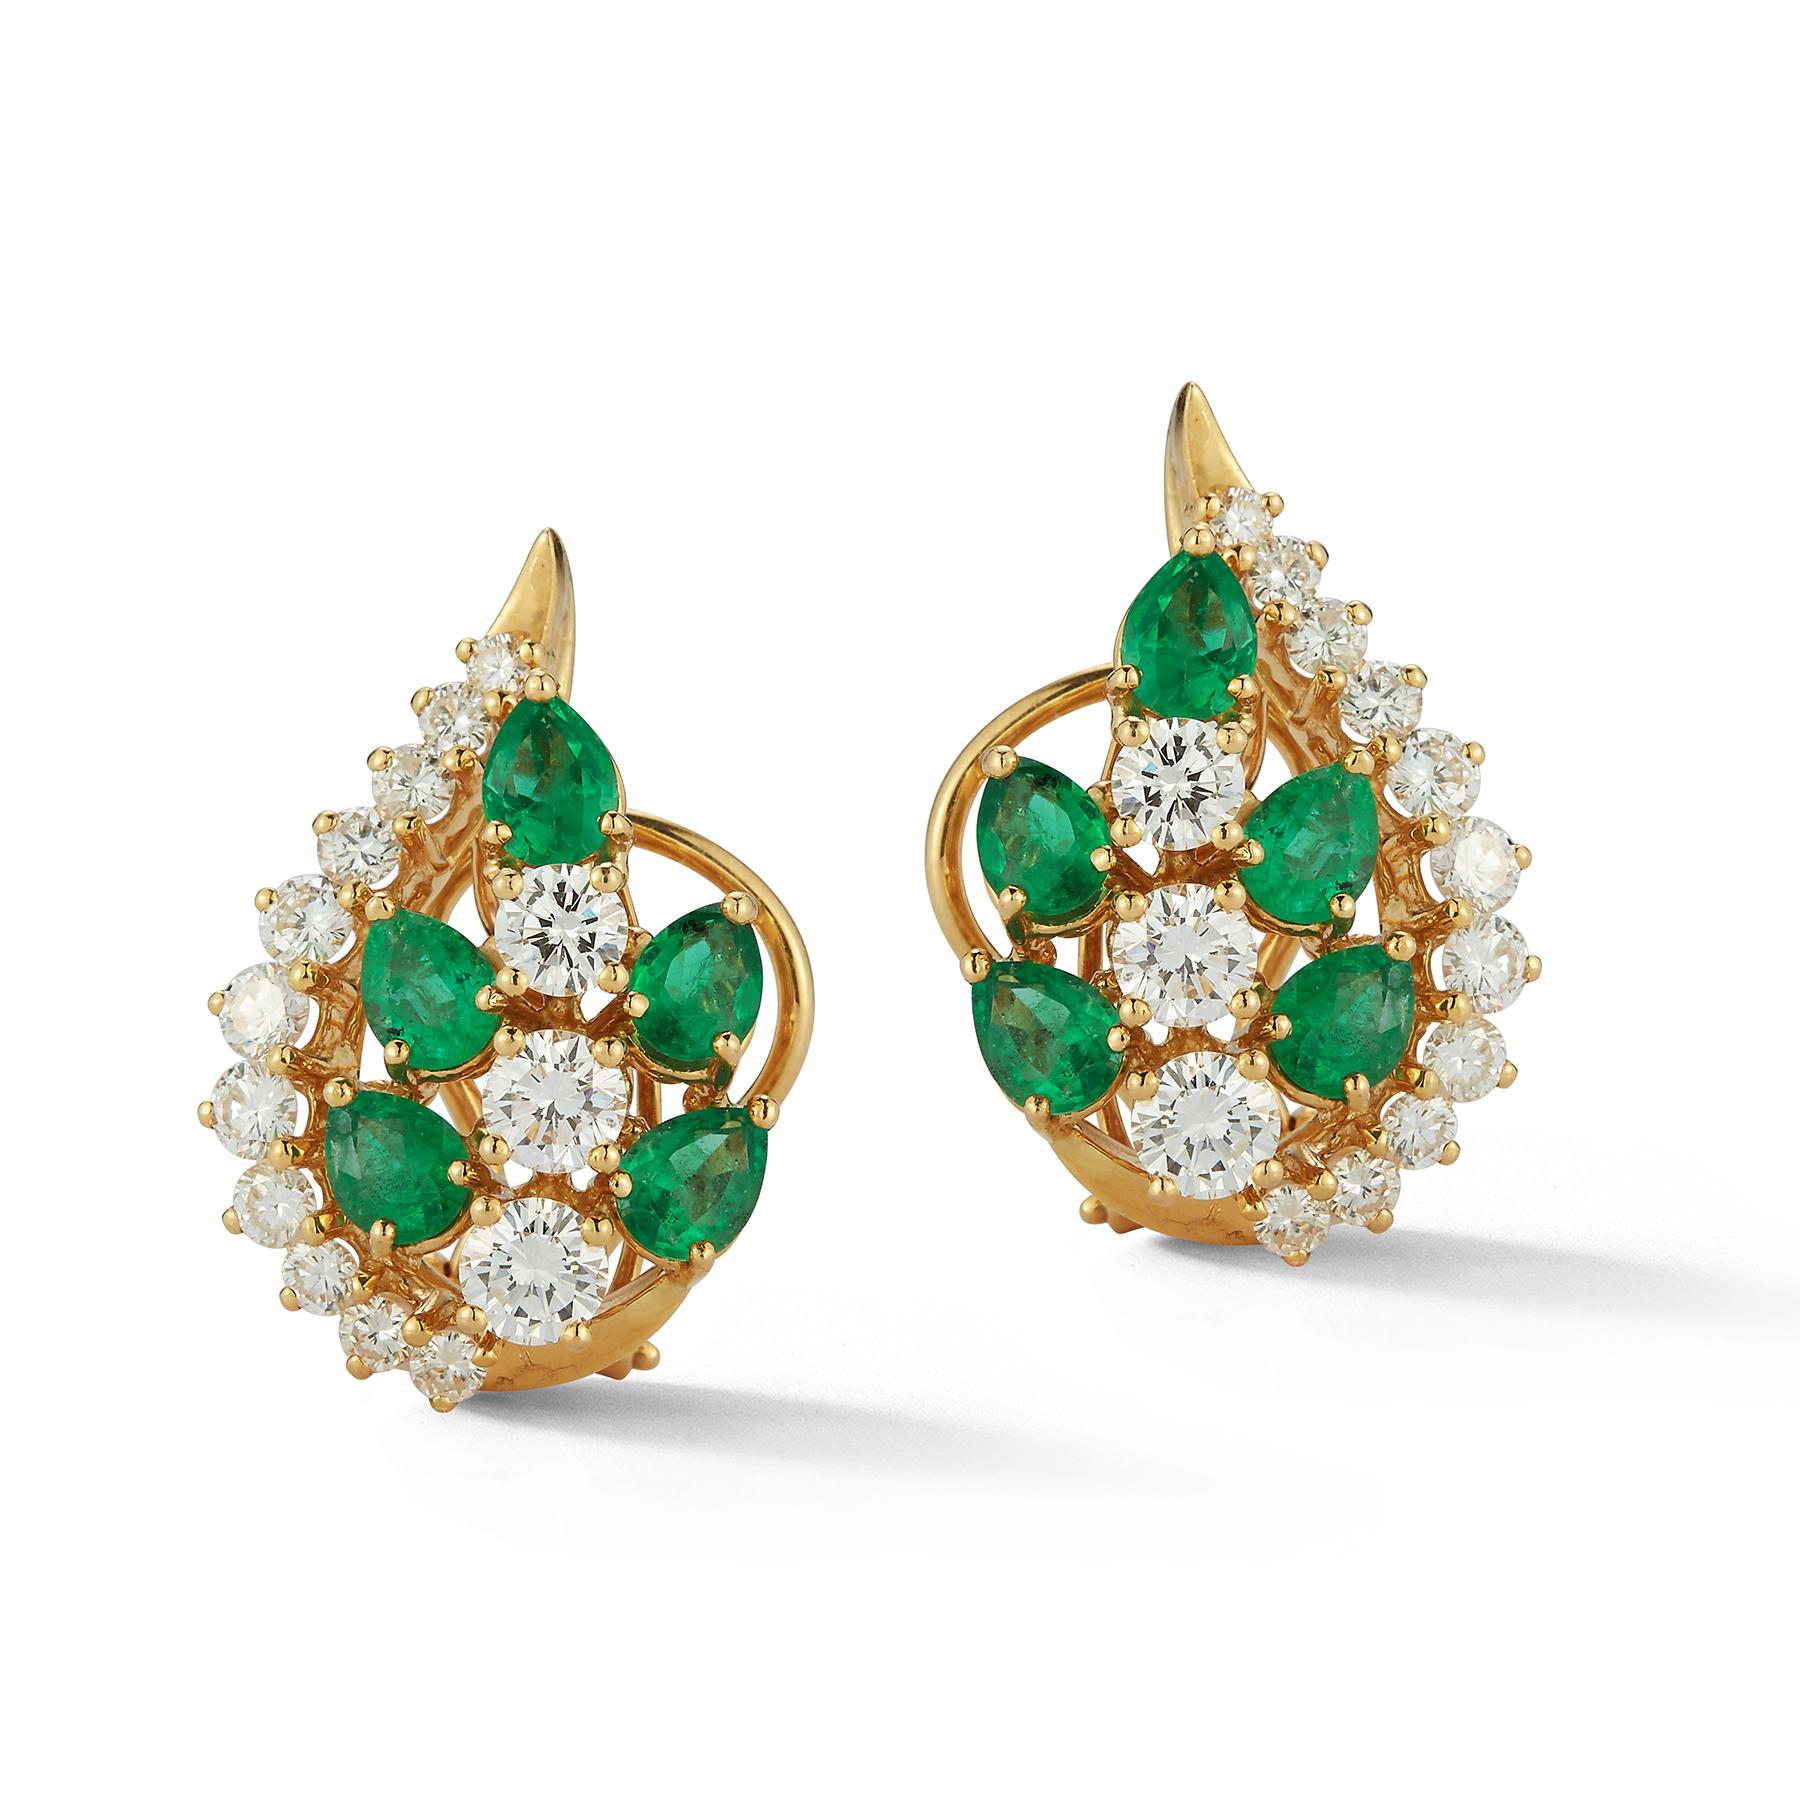 Emerald and Diamond Earrings

5 pear shape emeralds surrounding 3 round cut diamonds and 11 smaller round cut diamonds

Back Type: Clip on with post 

Measurements: .85